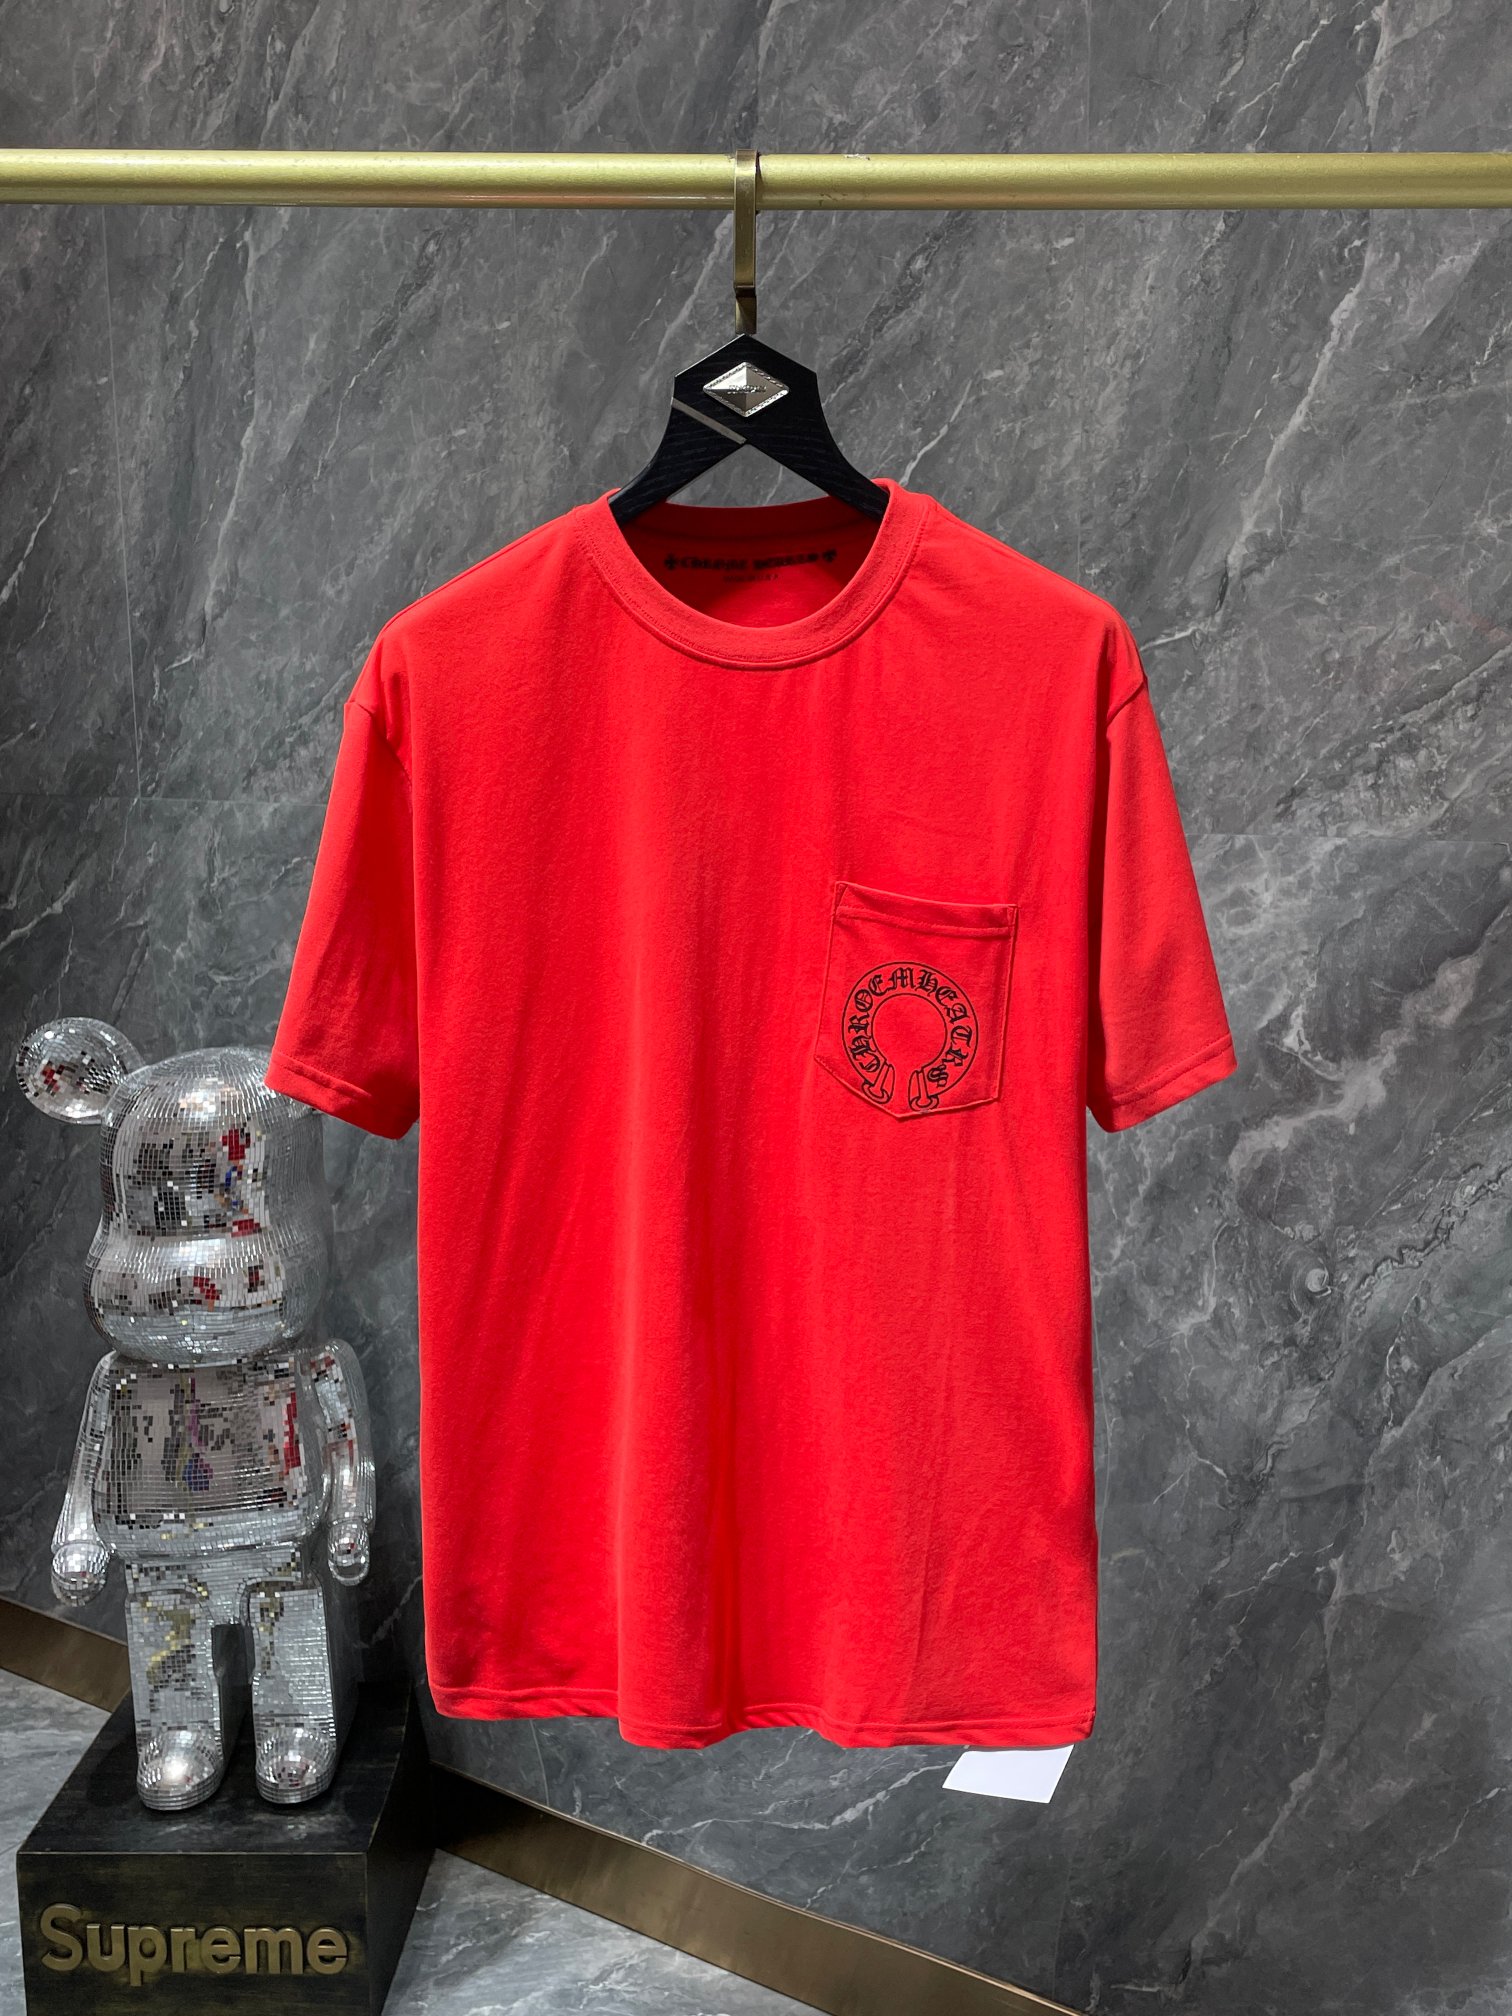 Shop
 Chrome Hearts Clothing T-Shirt Doodle Red Boy Summer Collection Short Sleeve